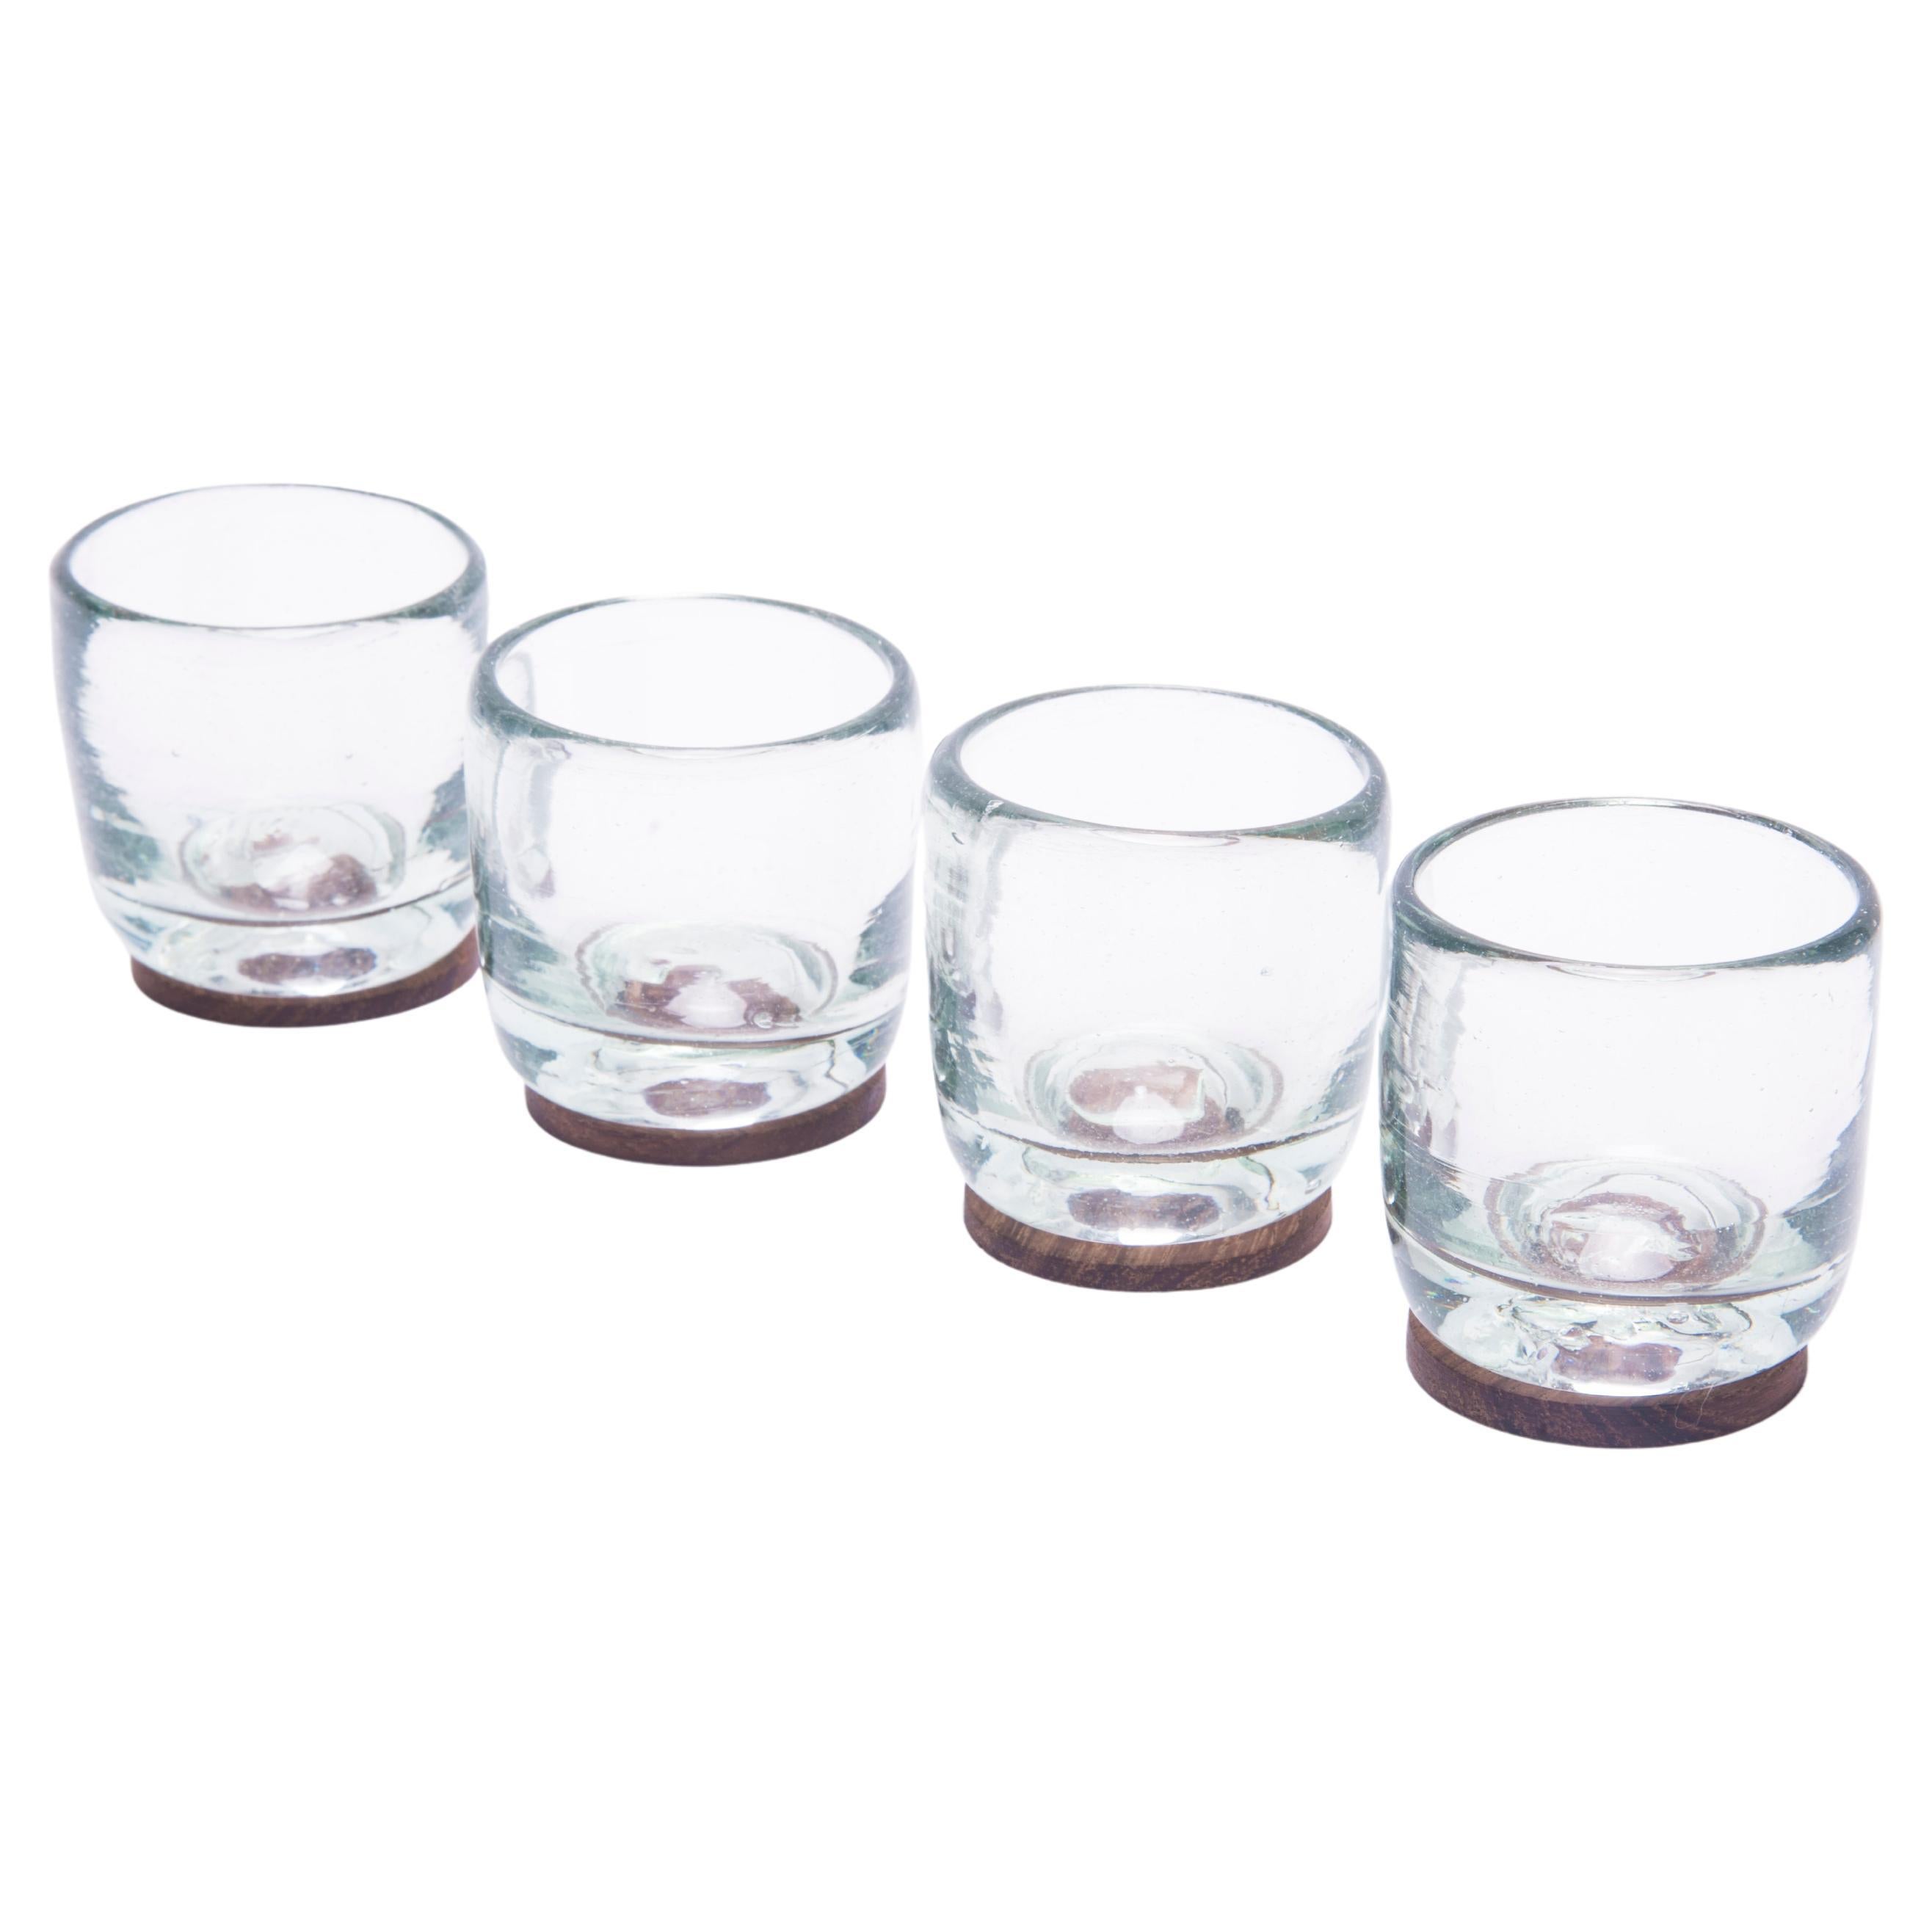 4 Piece Set of Transparent Hand Blown Shot Glasses with Parota Wood Coasters For Sale